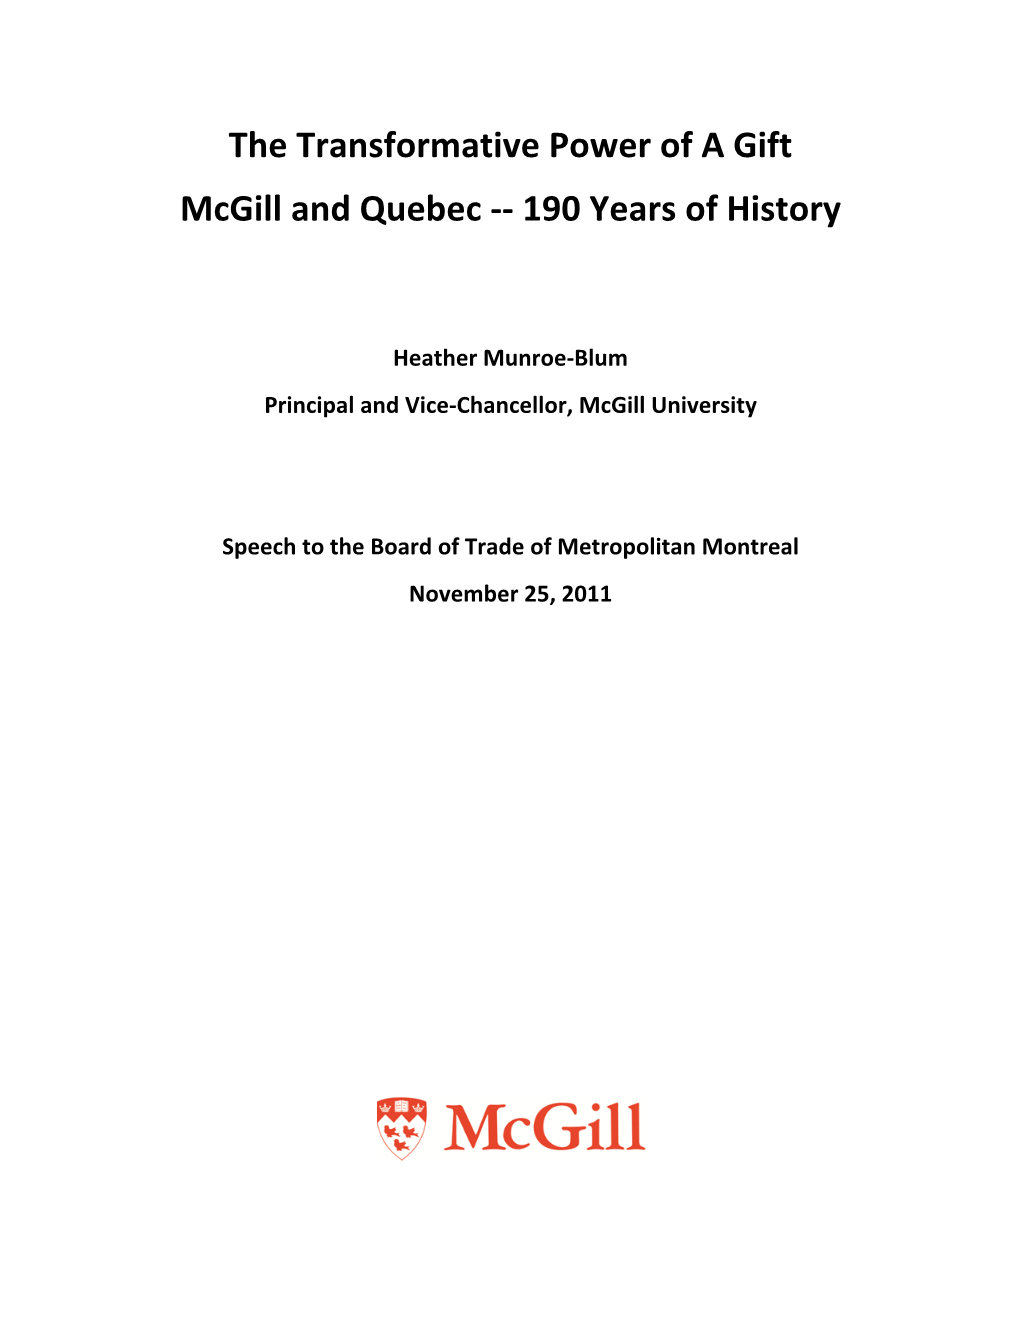 The Transformative Power of a Gift Mcgill and Quebec -- 190 Years Of